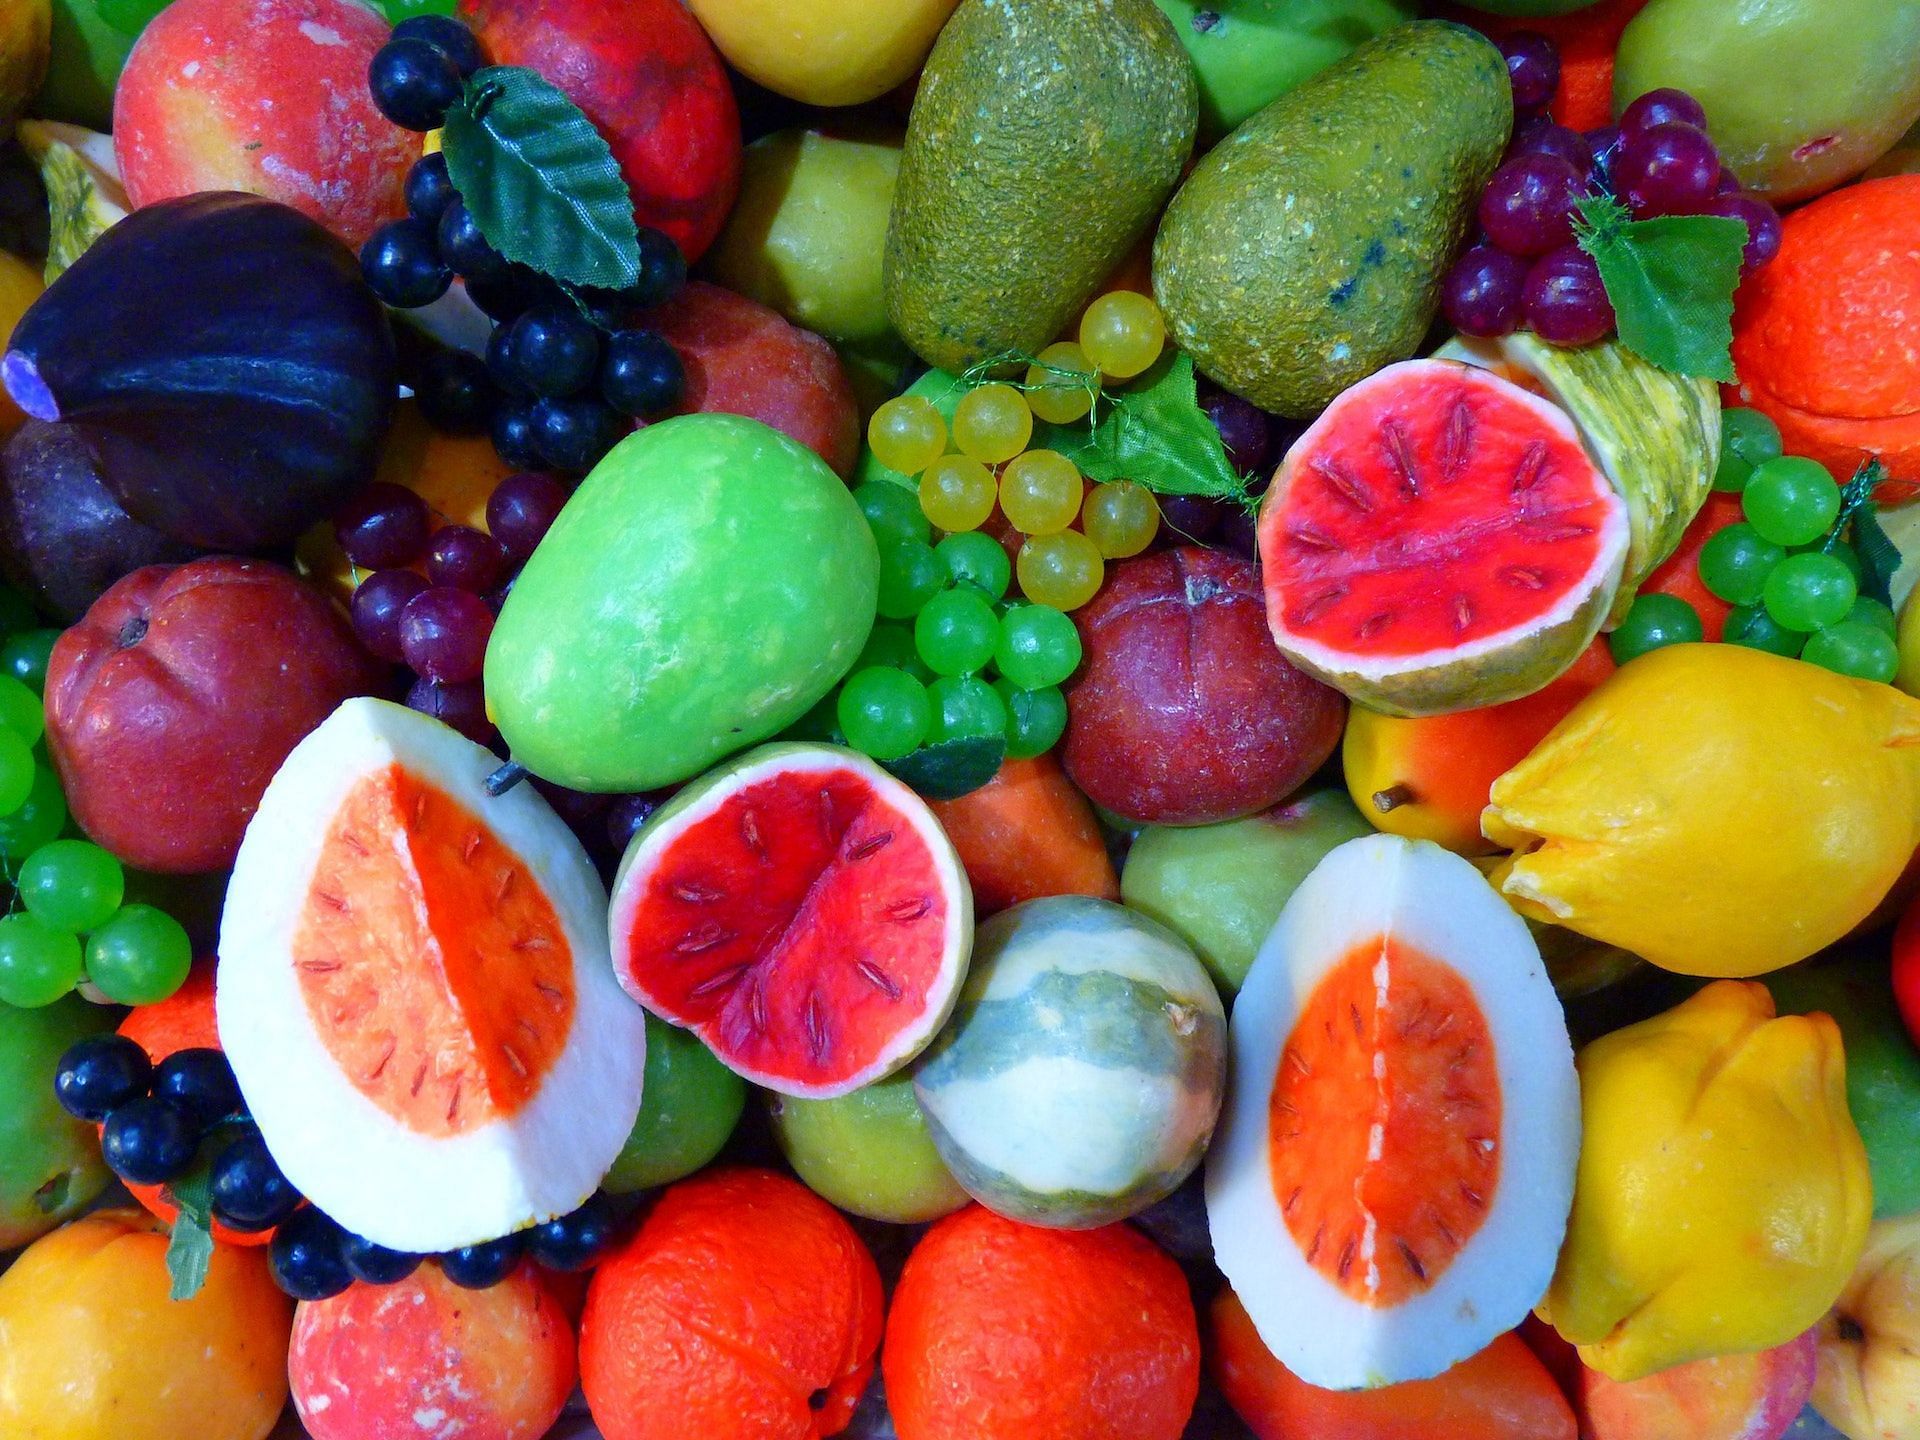 Eating fruits in the morning aids in digestion. (Photo via Pexels/Pixabay)